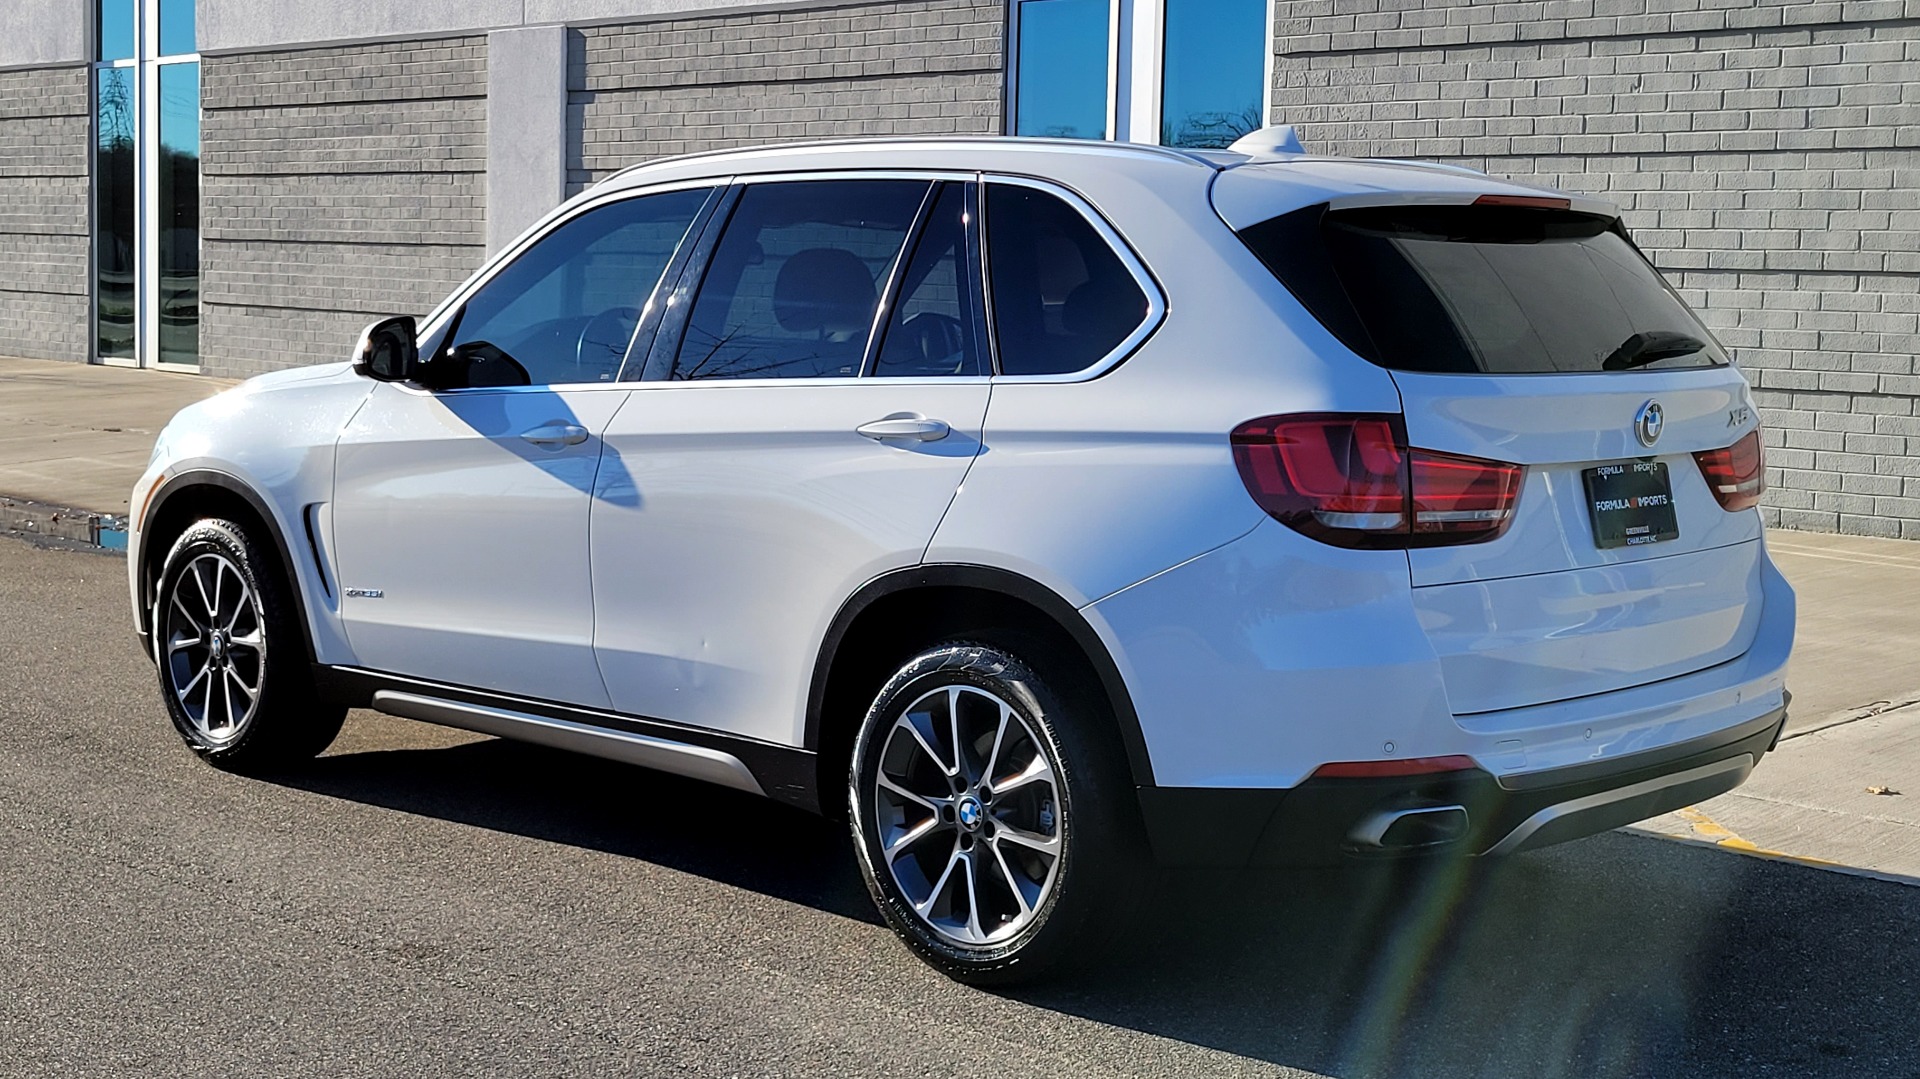 Used 2018 BMW X5 XDRIVE35I PREMIUM / DRVR ASST / HUD / WIRELESS CHARGING / HTD ST for sale $46,795 at Formula Imports in Charlotte NC 28227 5